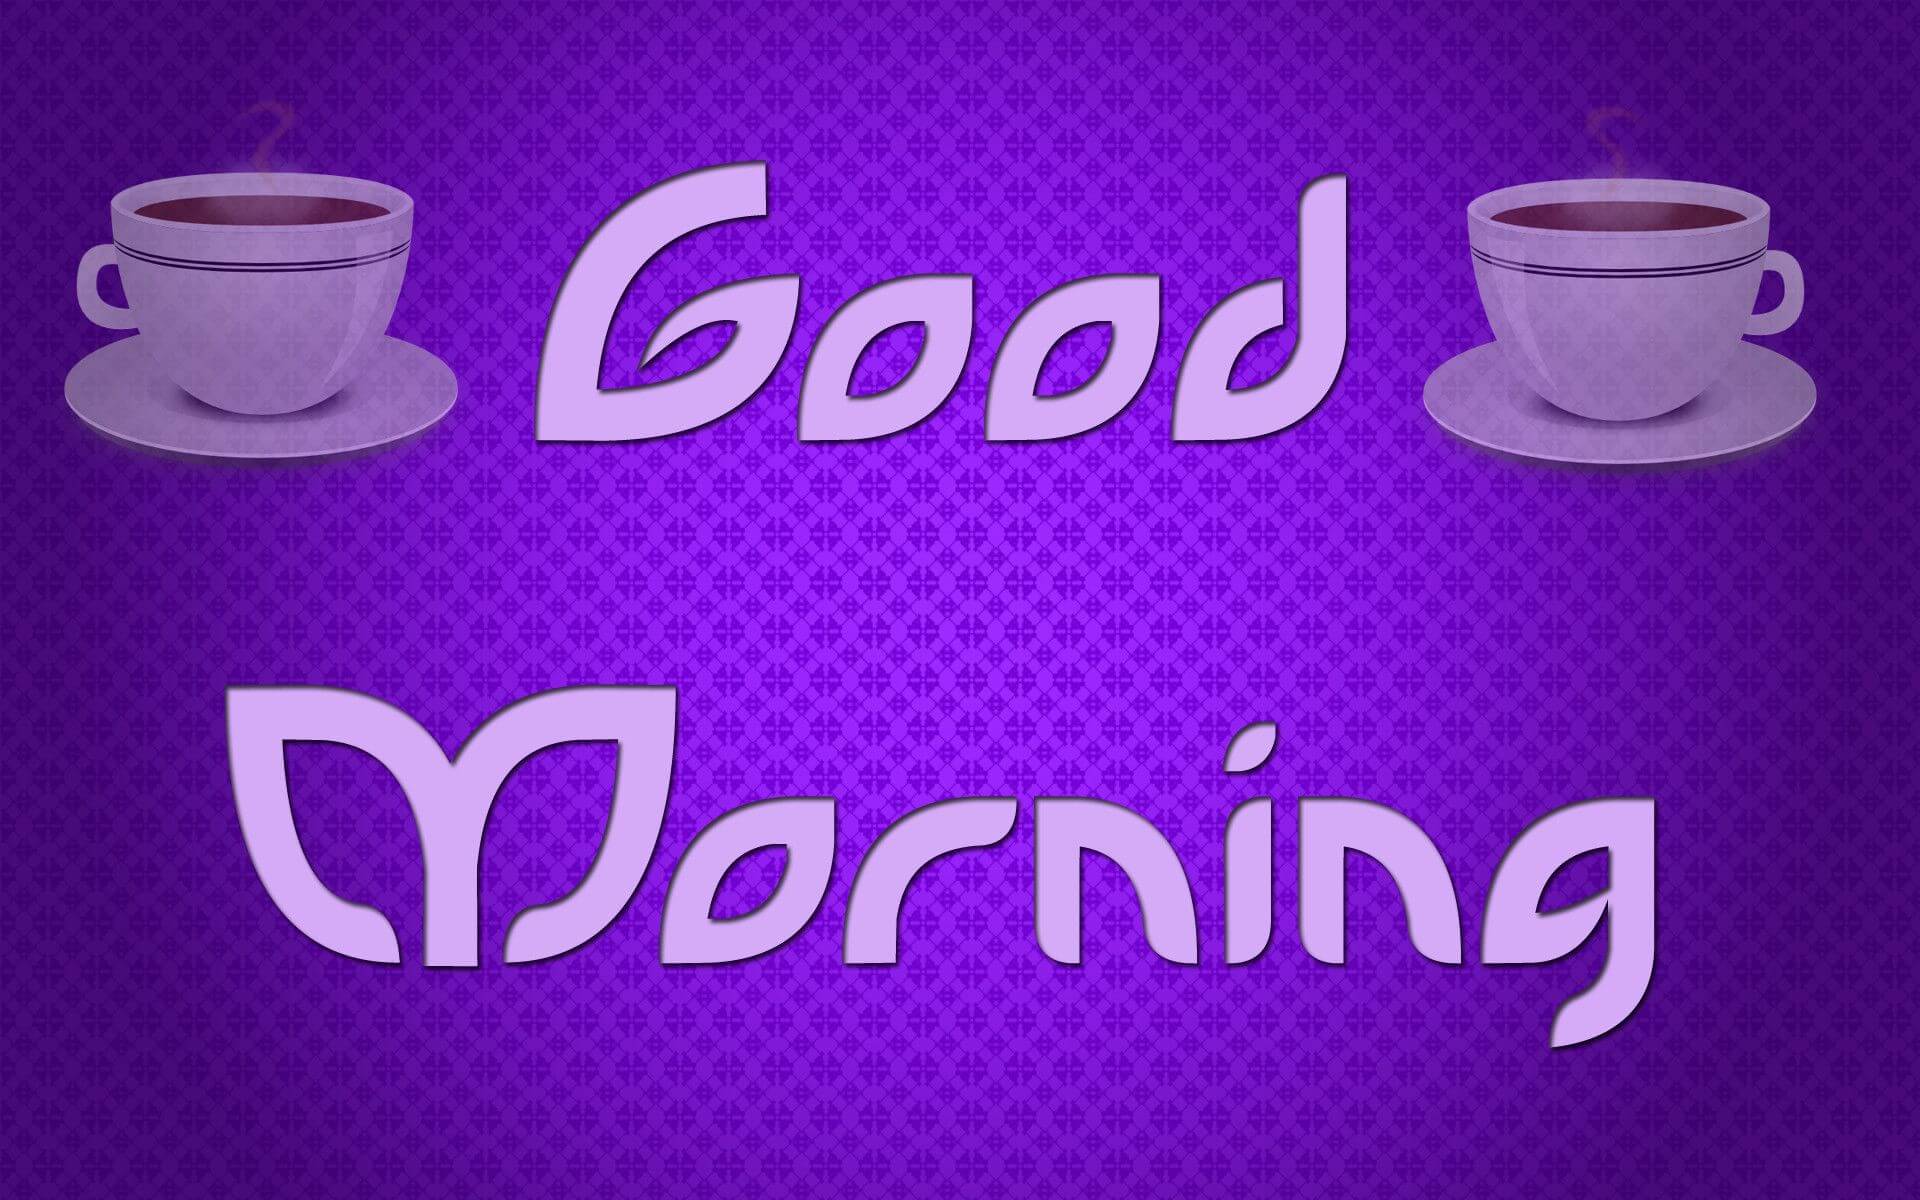 good morning hd wallpaper,purple,text,product,violet,font